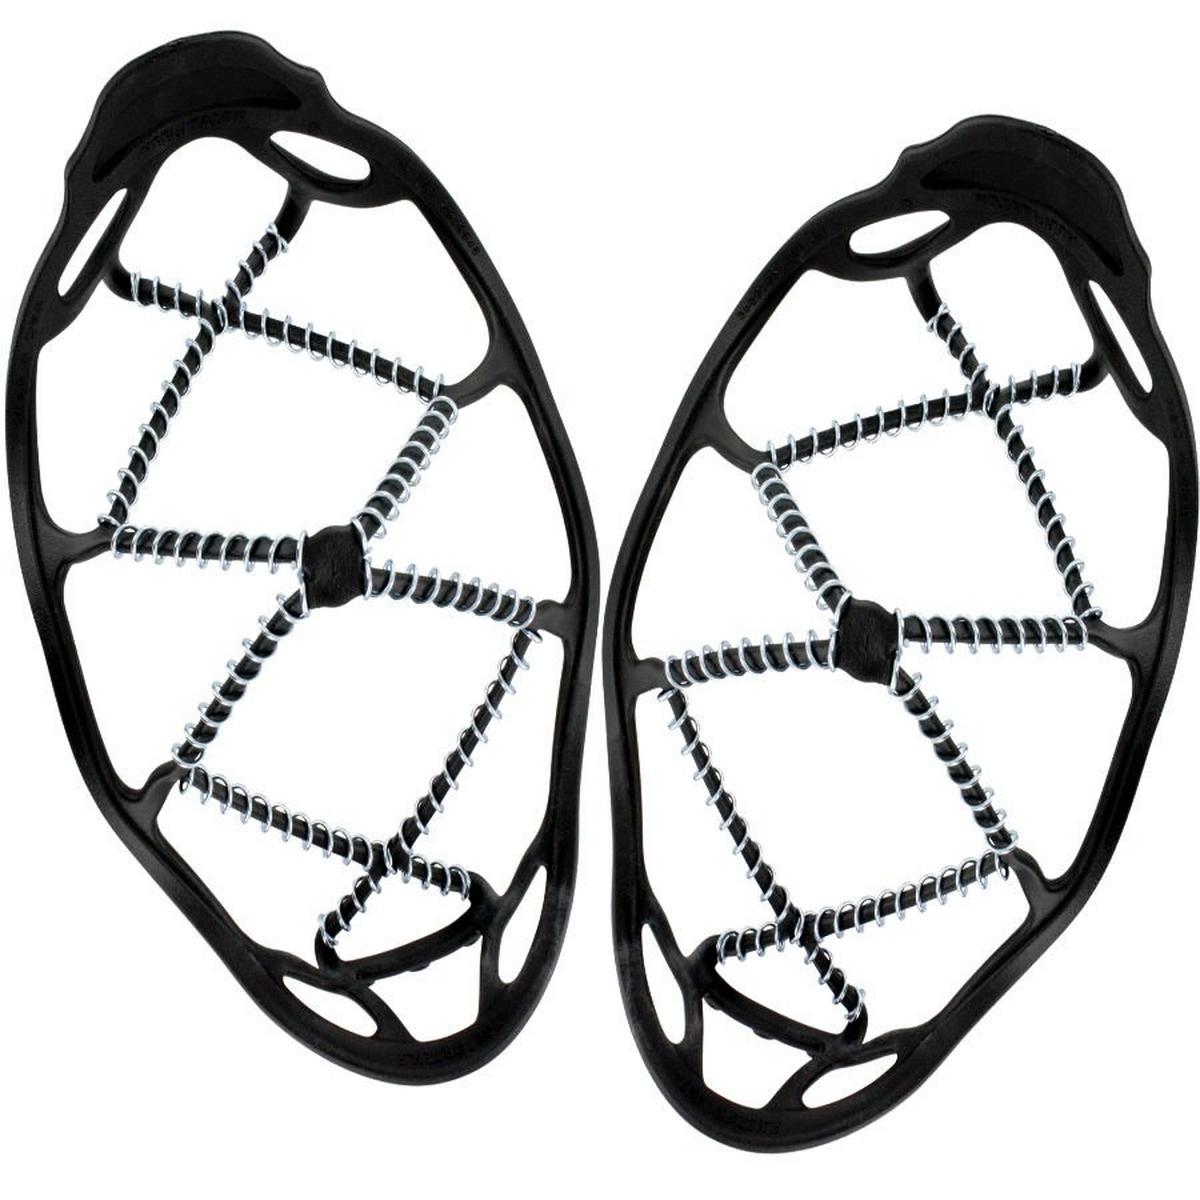 Yaktrax Walker Ice Grip - Small to Large